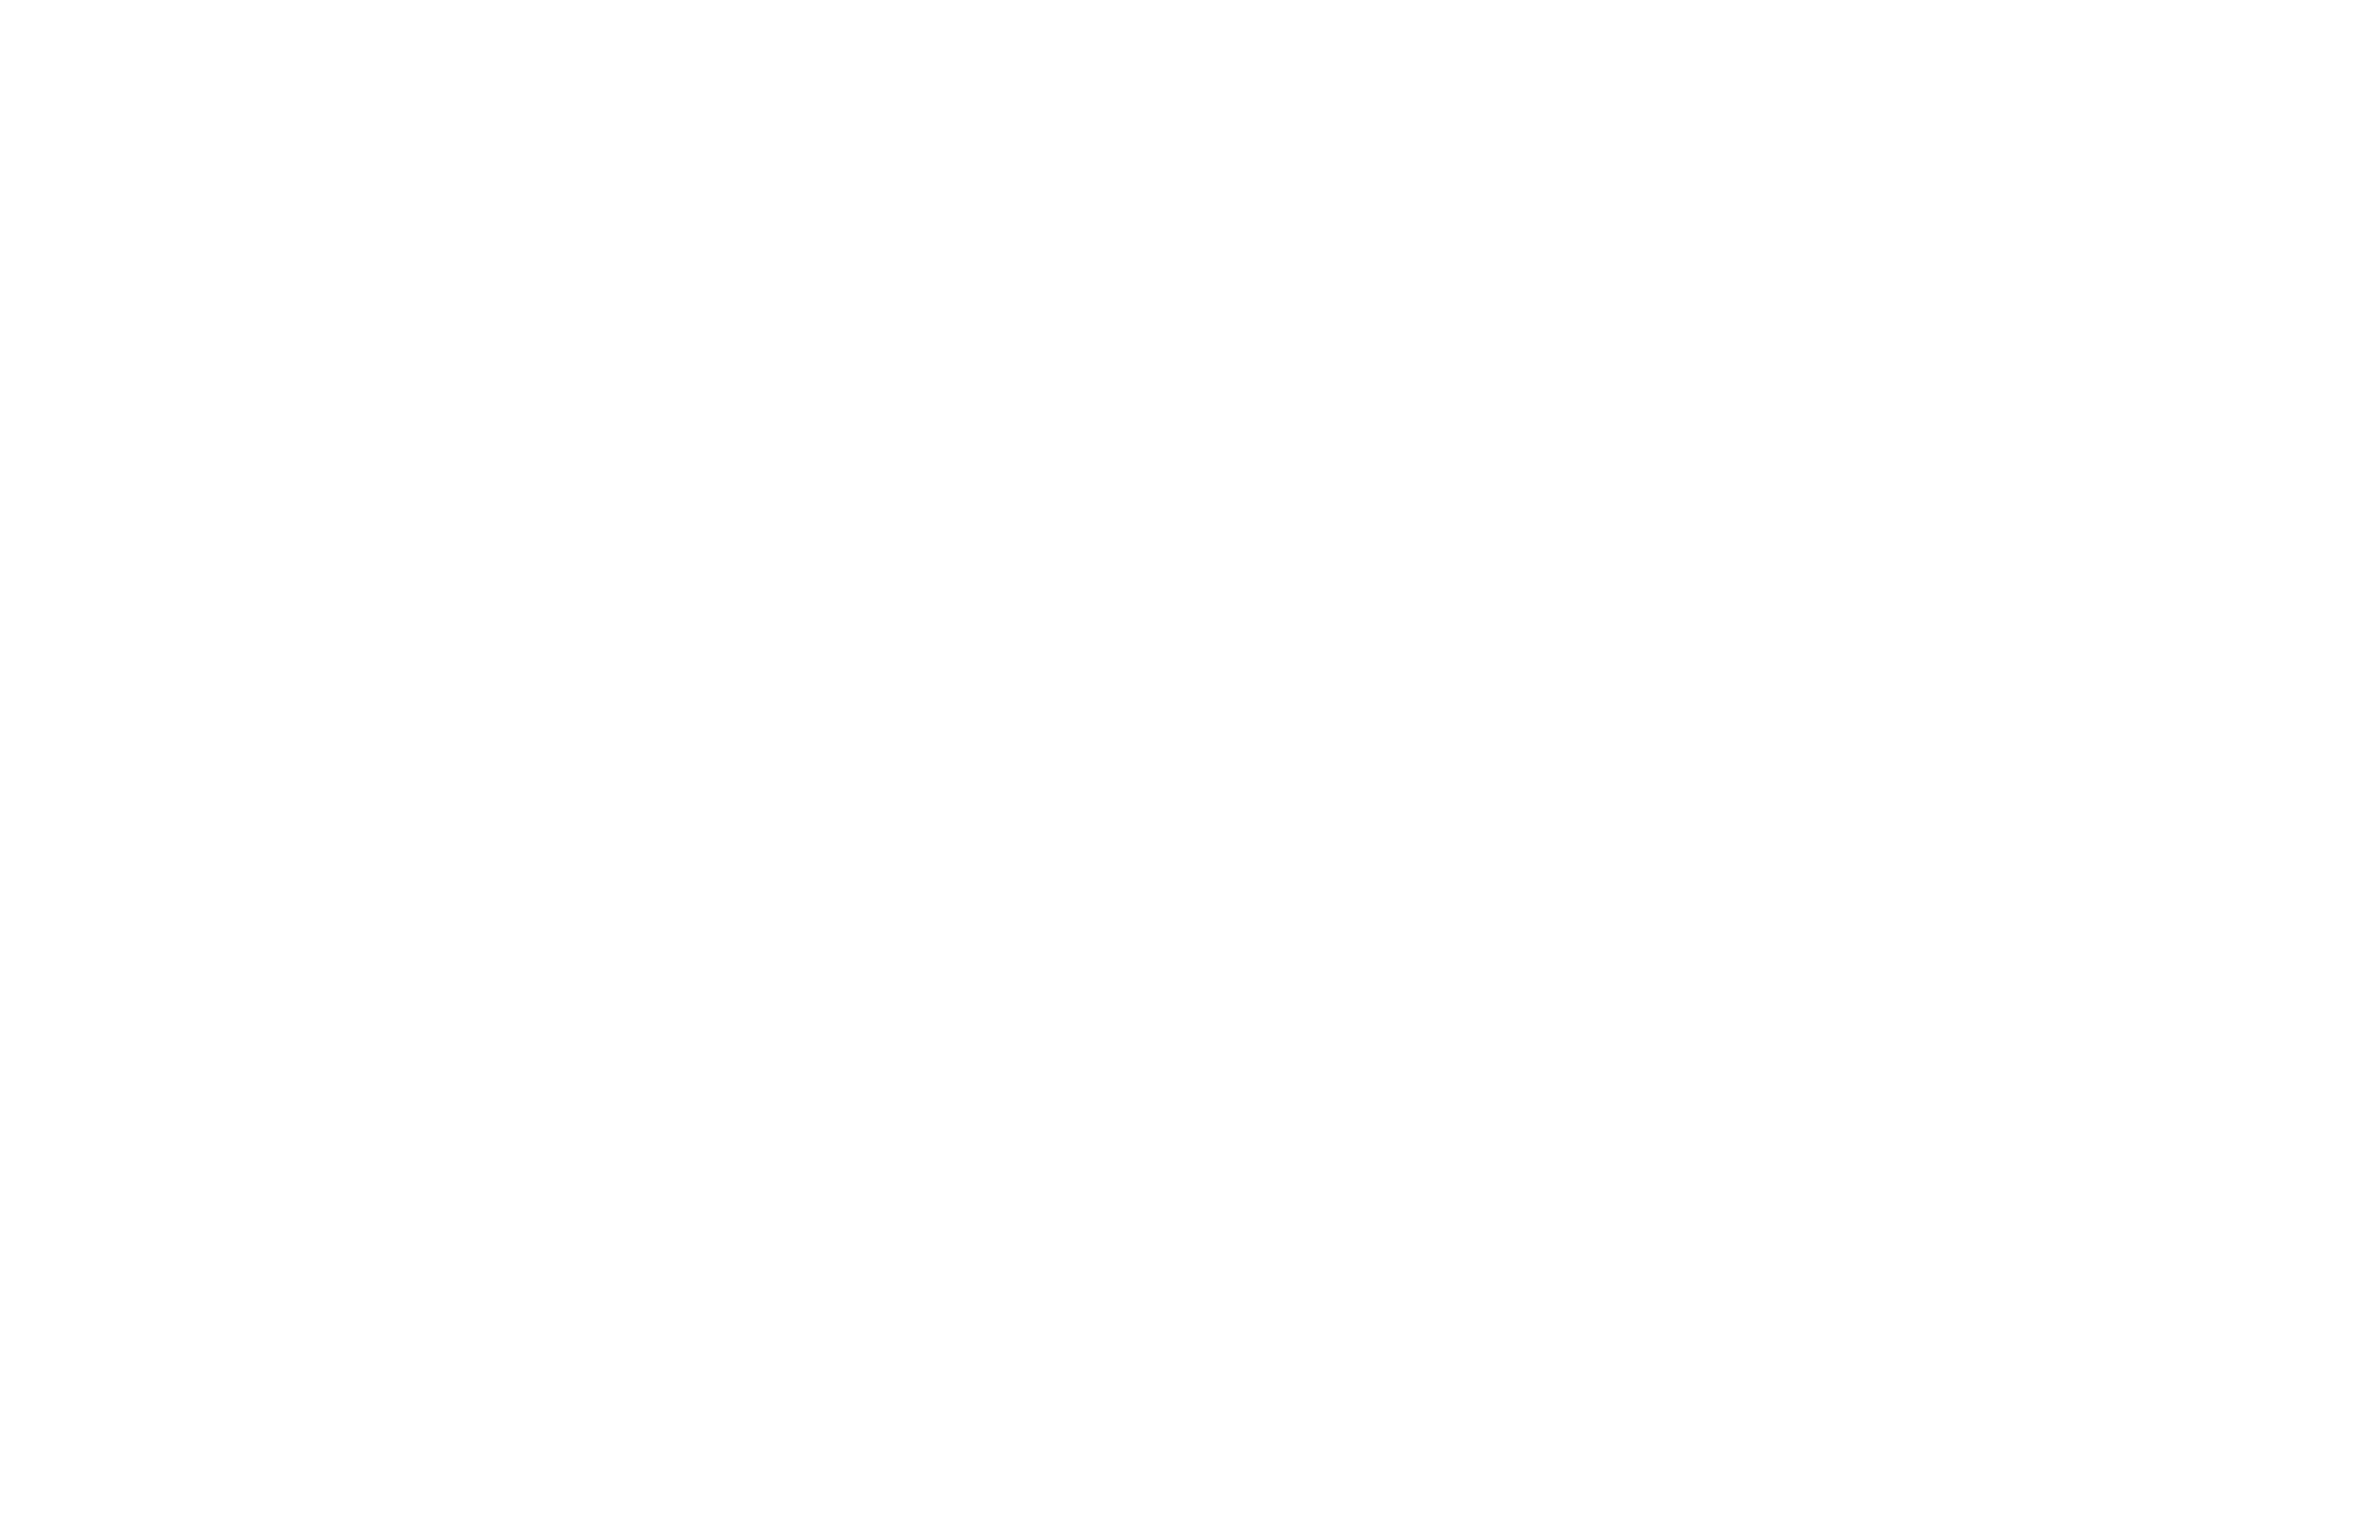 DLA tax + consulting